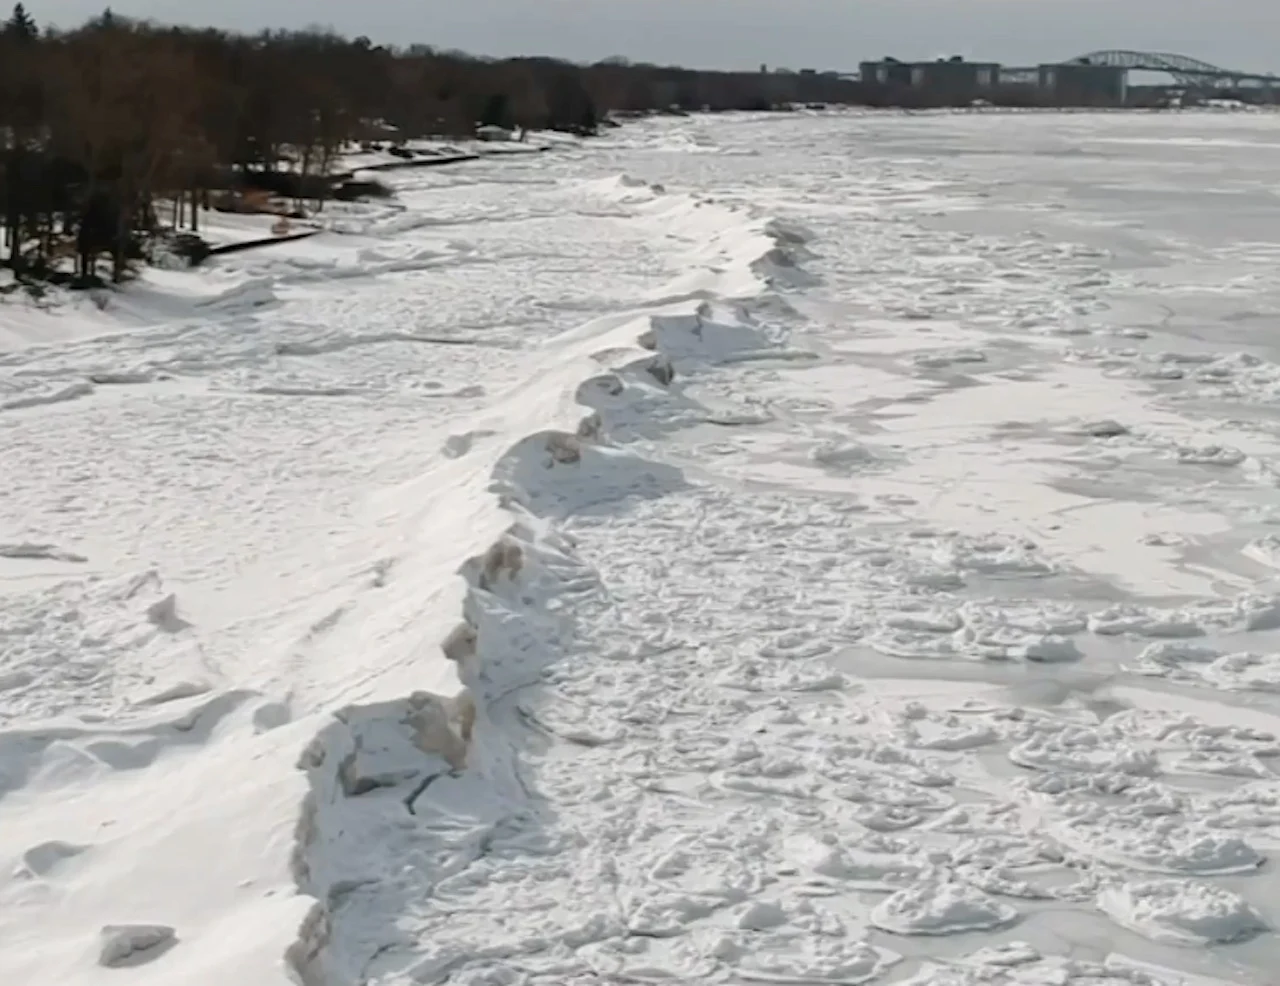 Ice shelves along Great Lakes pose threat from hidden 'volcanoes'